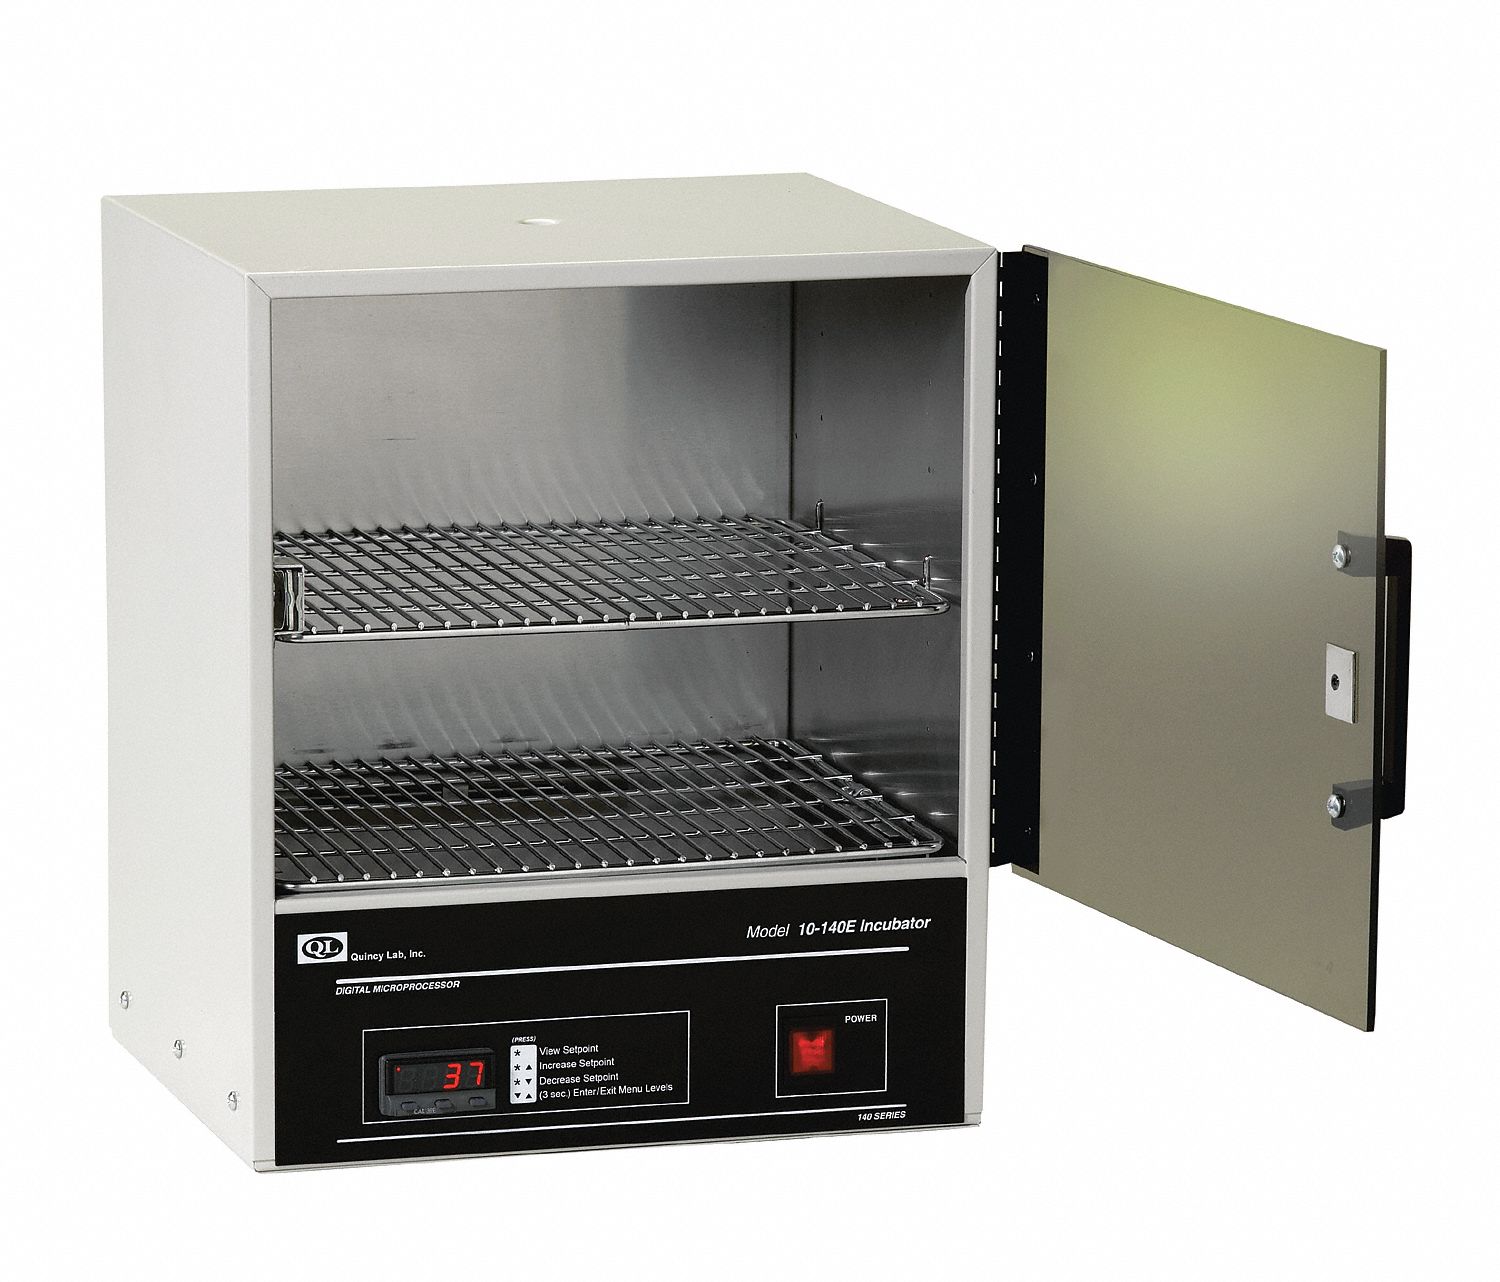 Incubator: Ambient +8° to 62°C, 0.7 cu ft Capacity (Cu.-Ft.), 15 in Overall Ht